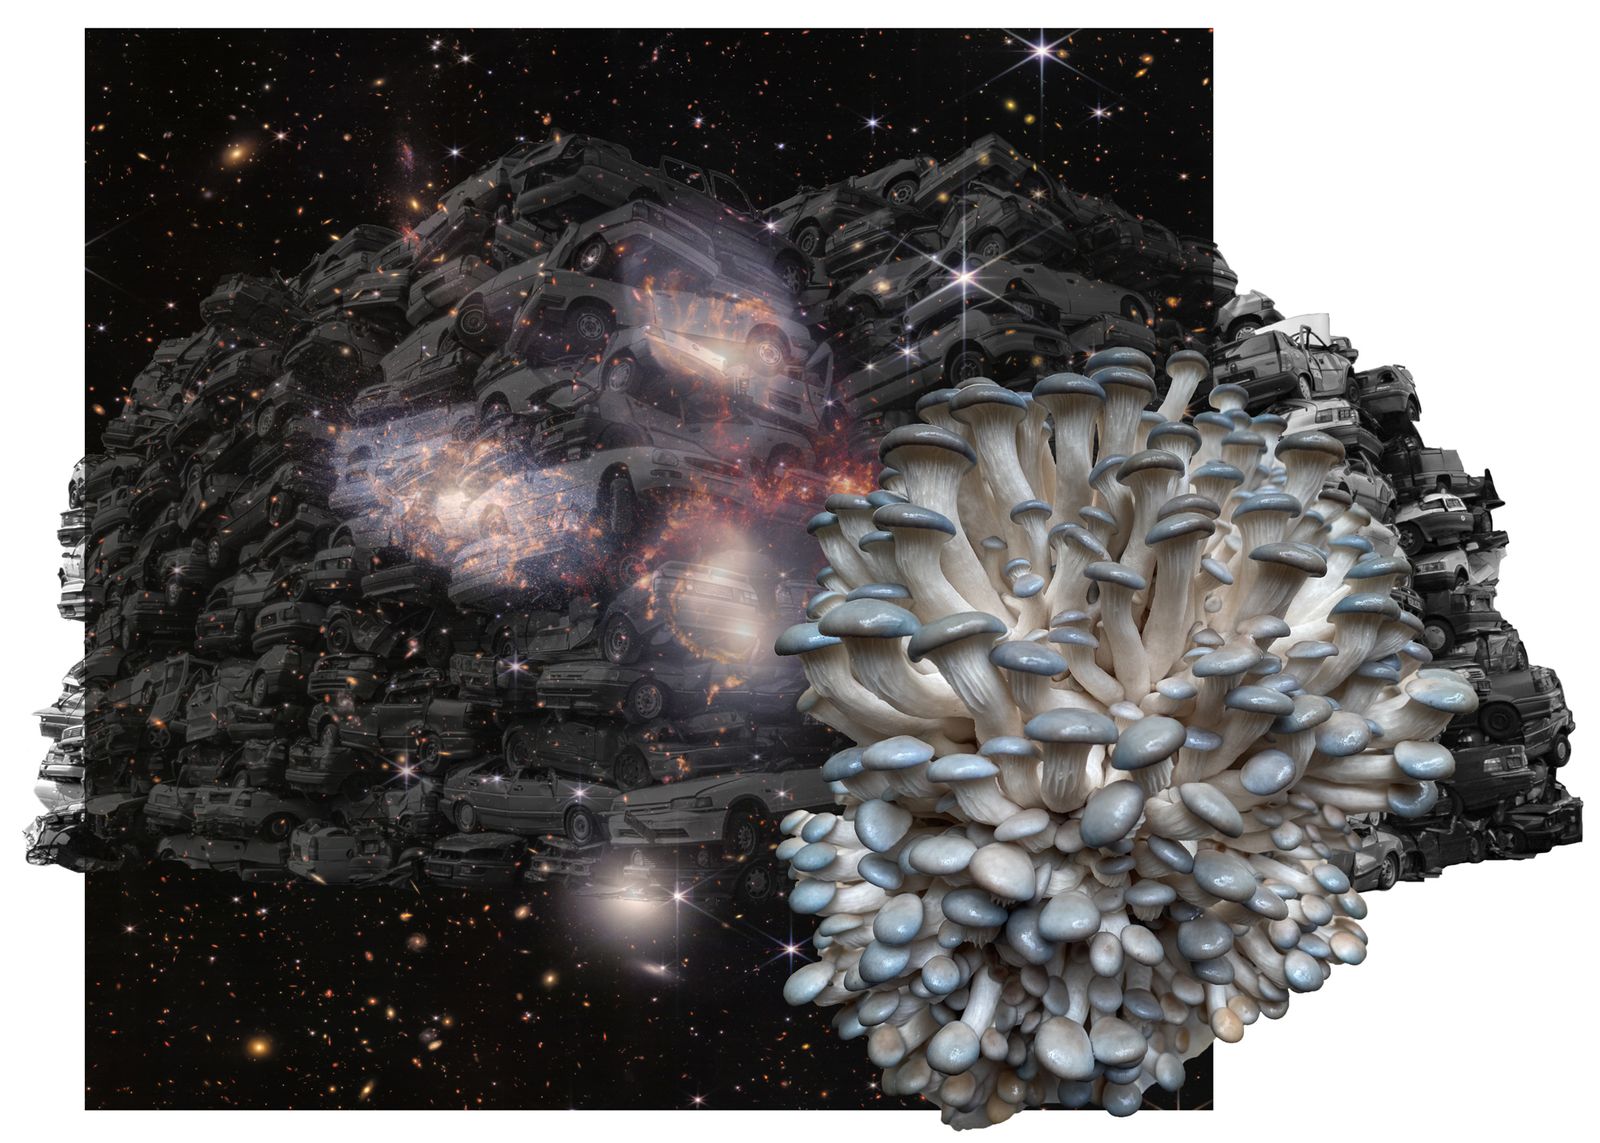 © Florence Iff - biodiversity, heap of cars, mushrooms, James-Webb picture of the universe